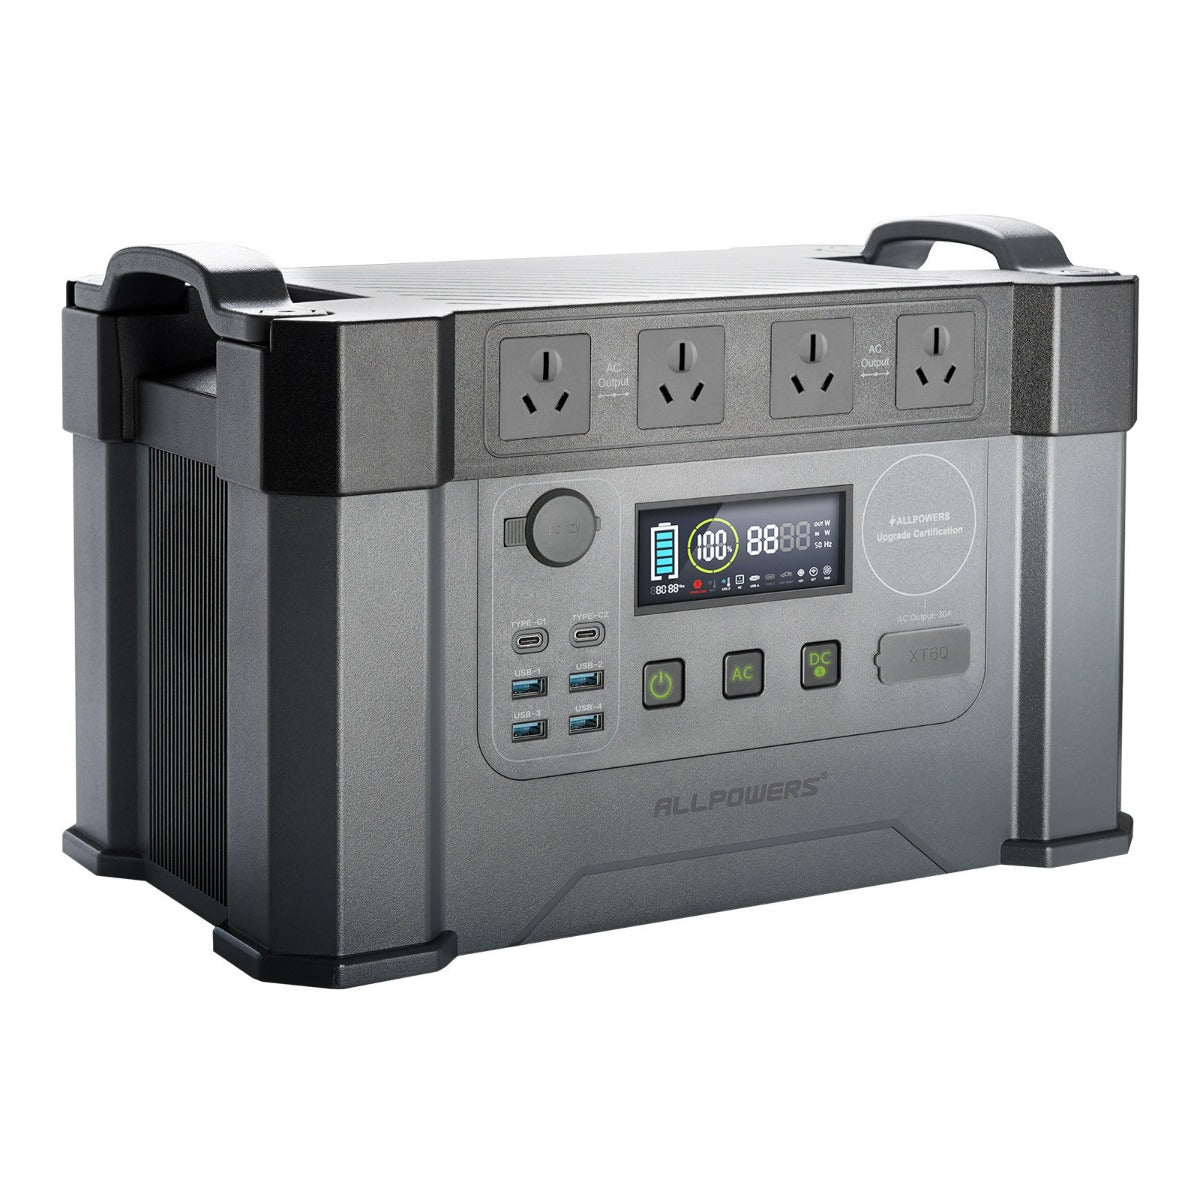 Allpowers M2000 Portable Power Station